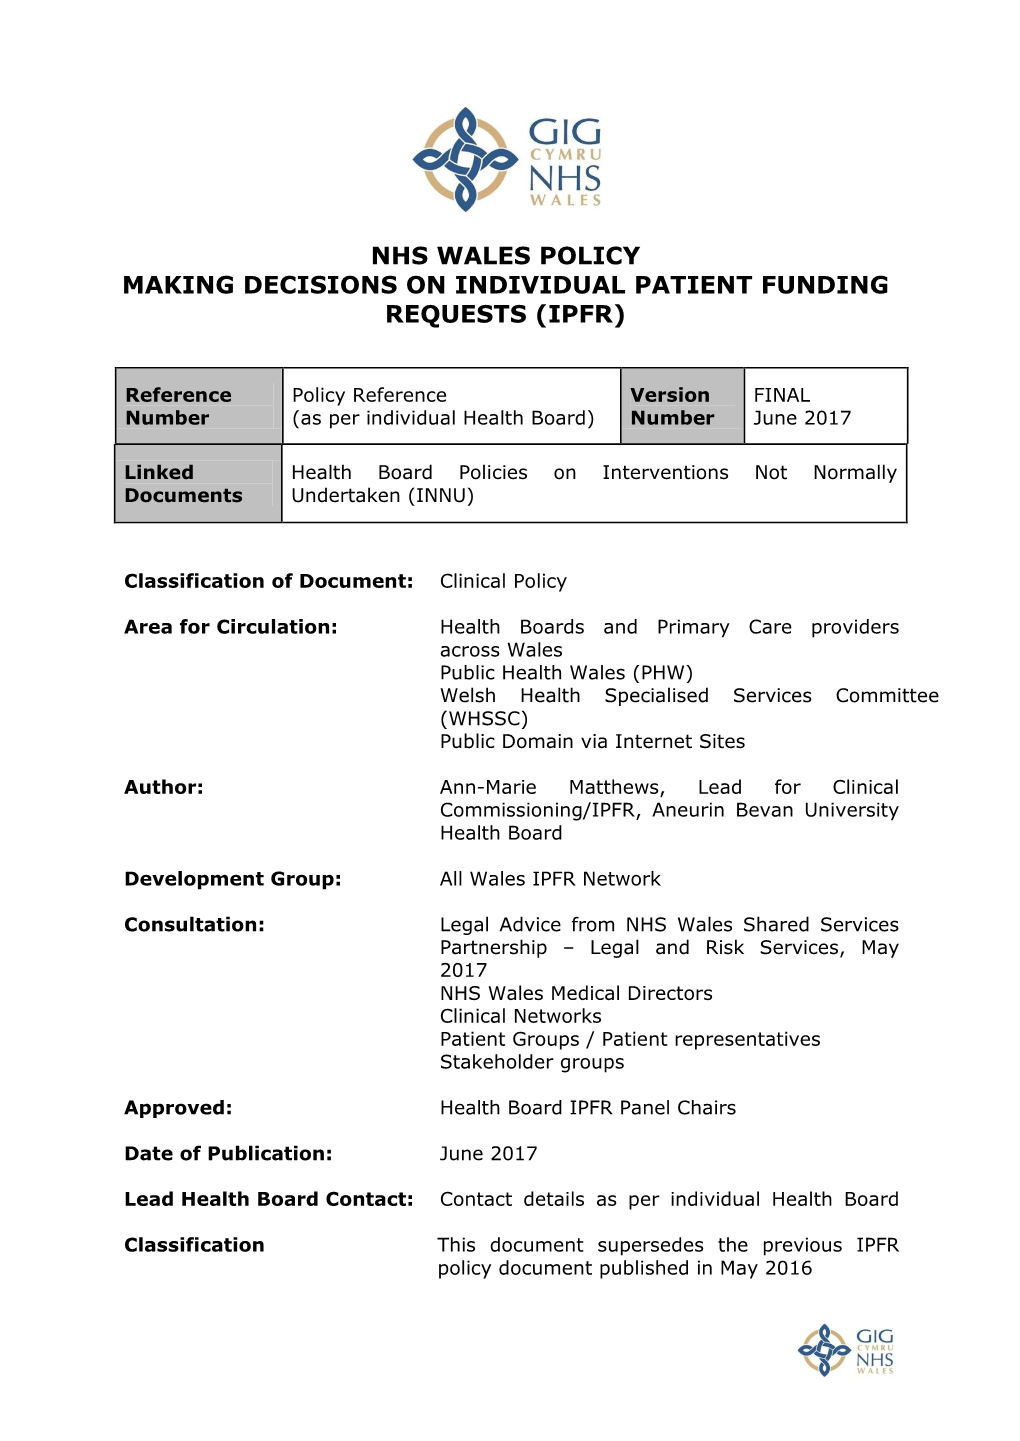 Nhs Wales Policy Making Decisions on Individual Patient Funding Requests (Ipfr)